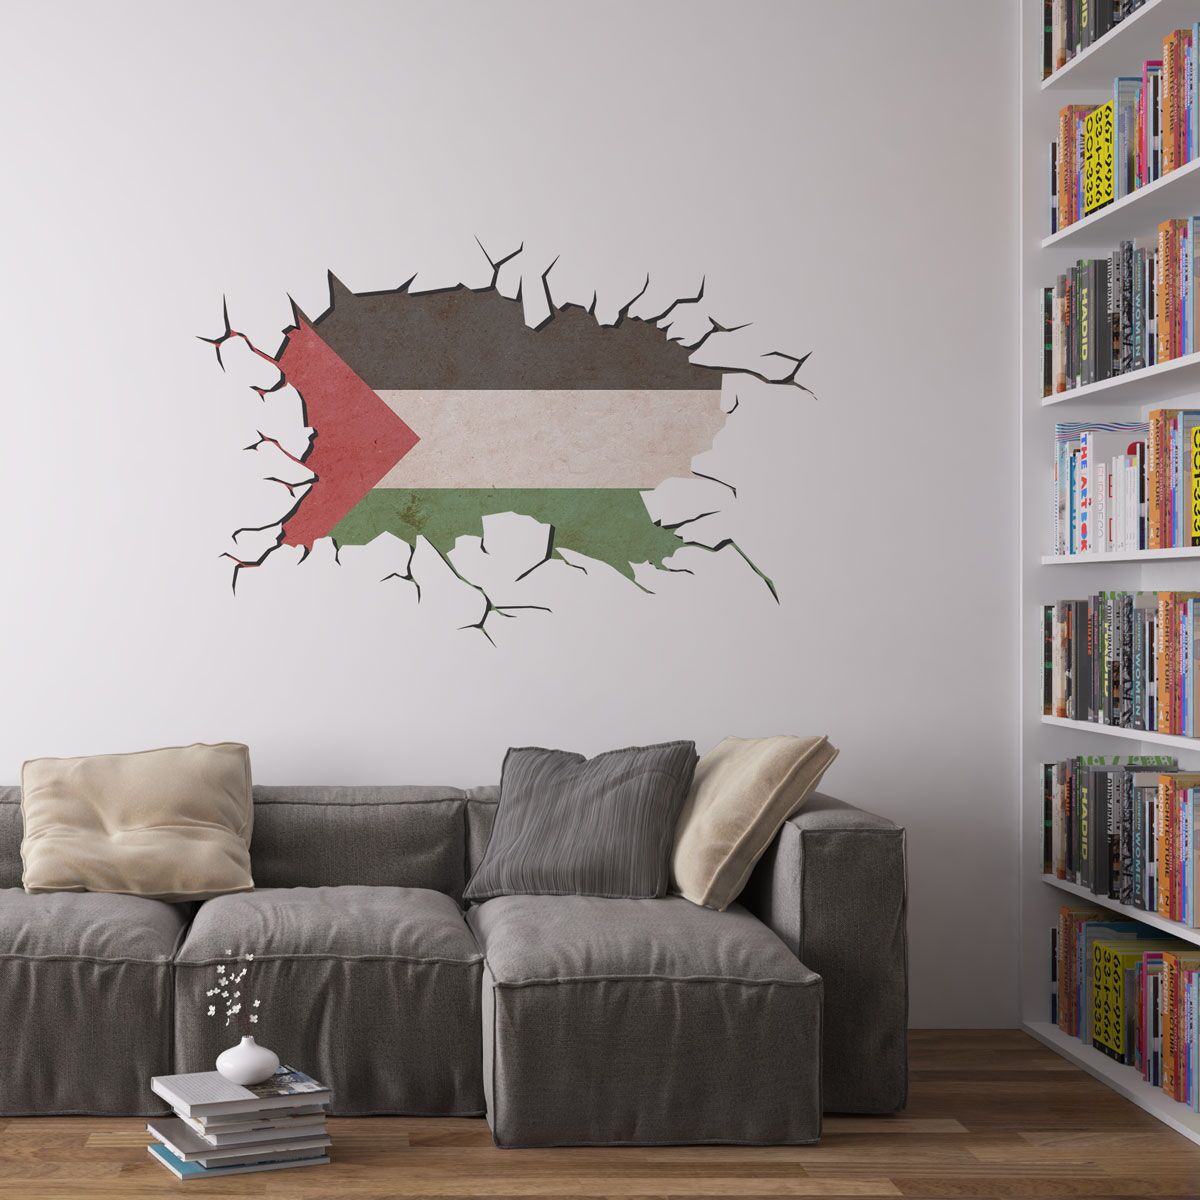 Cracked Wall Flag Of Palestine Wall Art